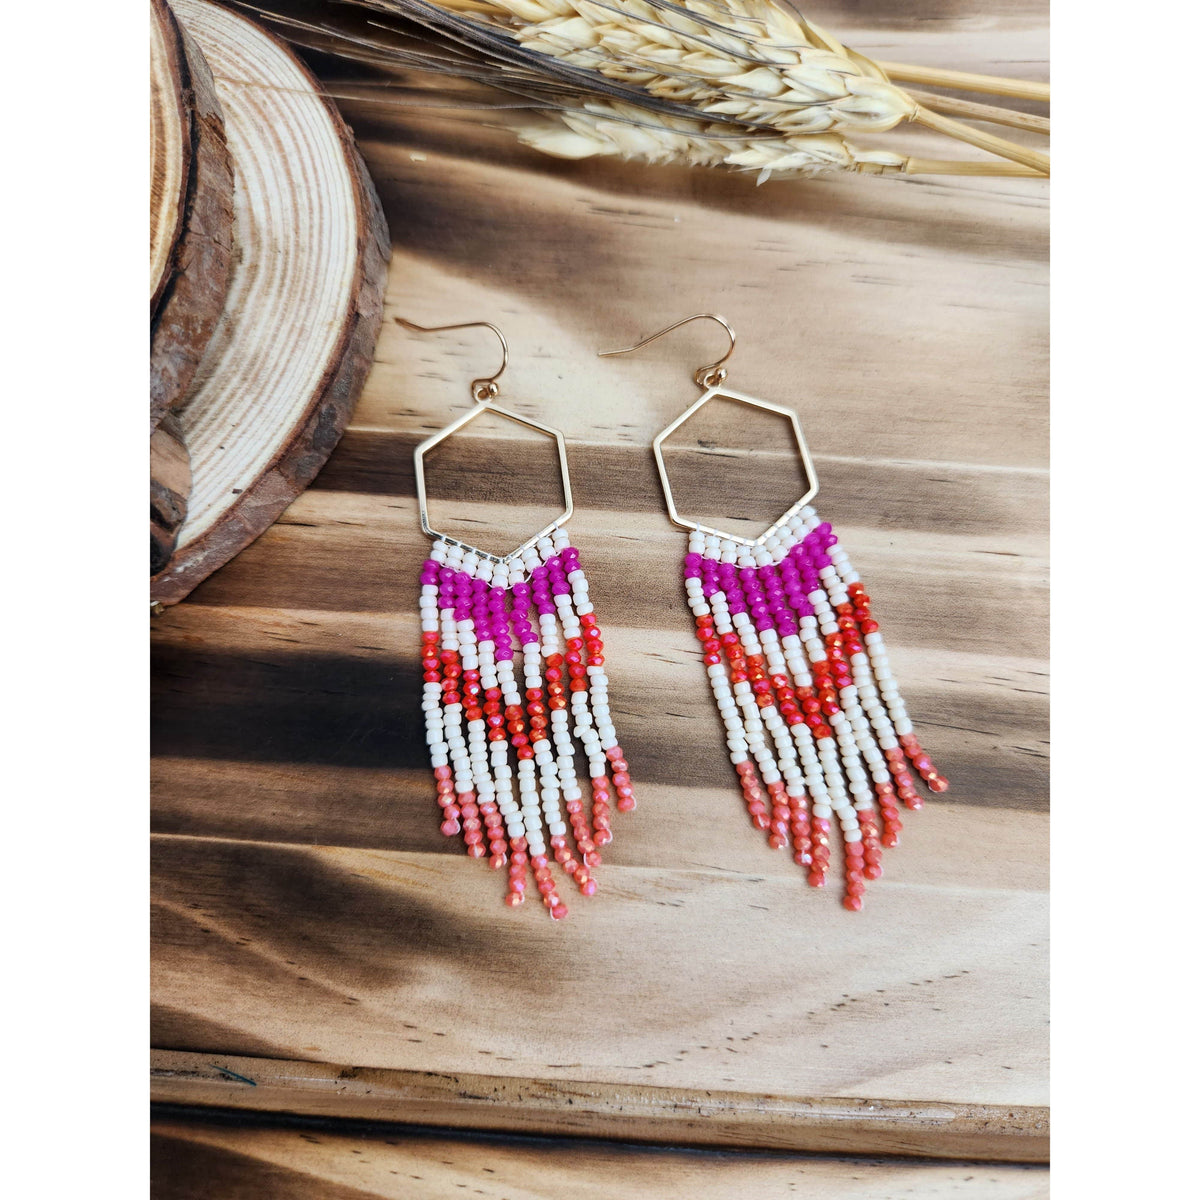 The Palms Beaded Fringe Dangle Earrings Earrings TheFringeCultureCollective